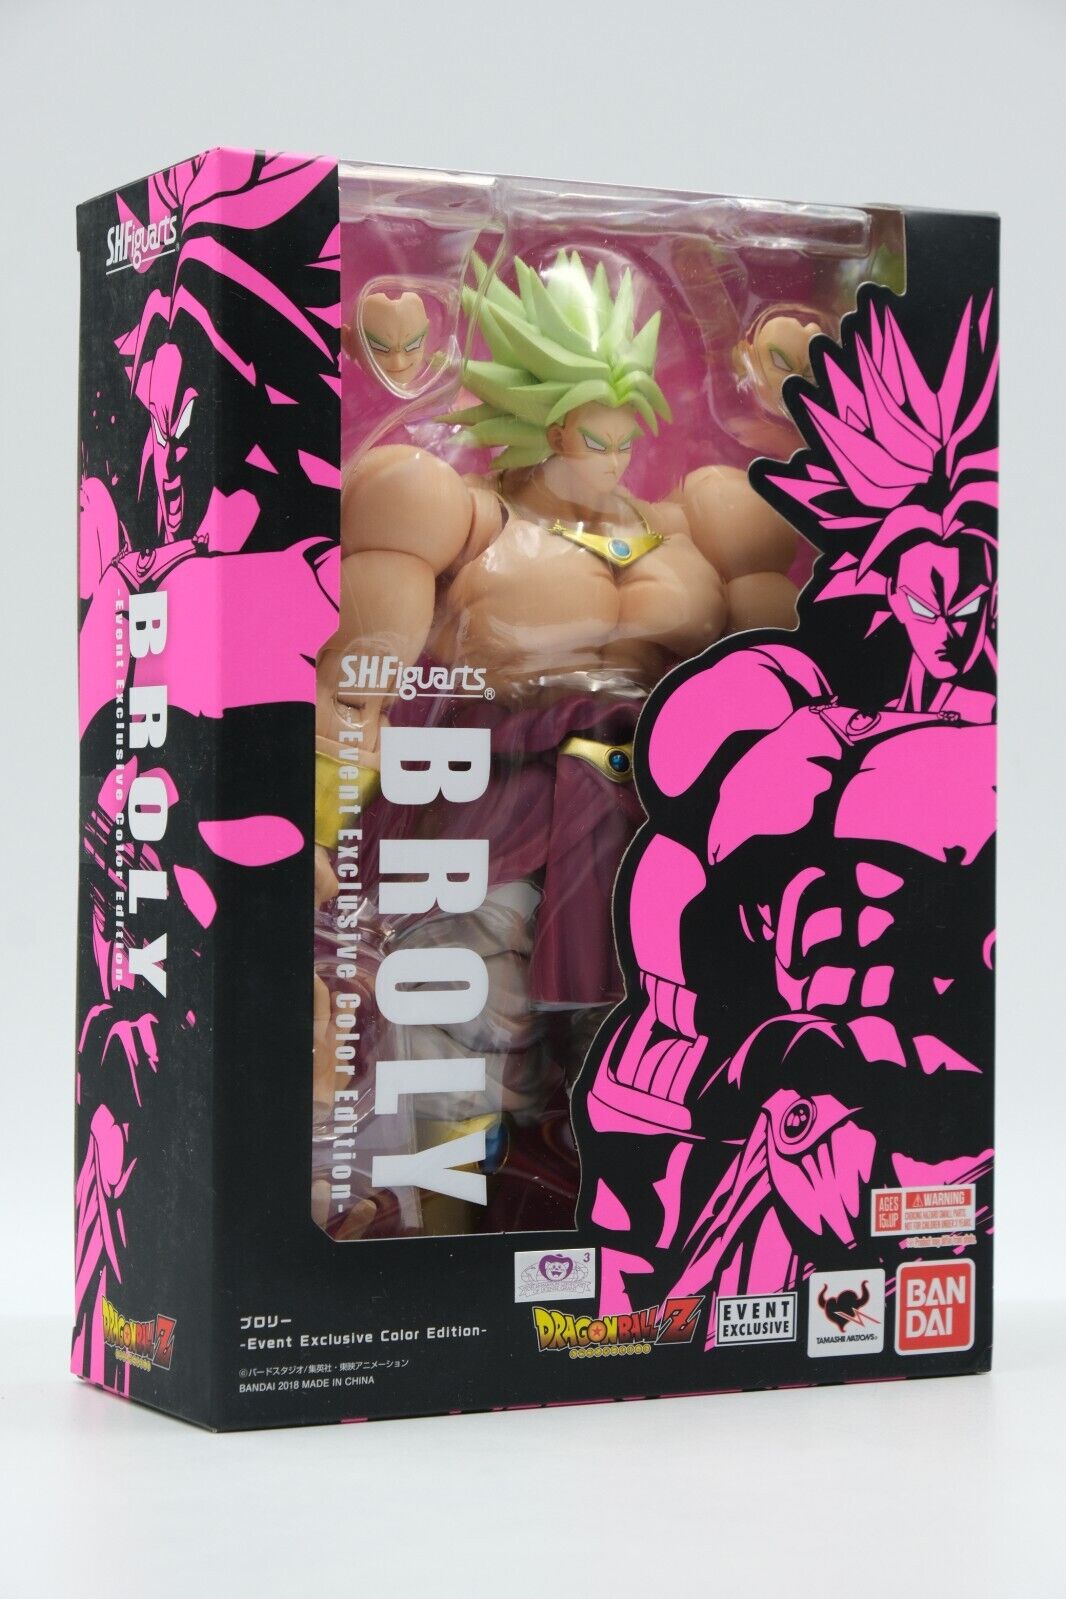 Bandai SH Figuarts Dragonball Z Broly Event Exclusive Color Edition 2018 Sealed